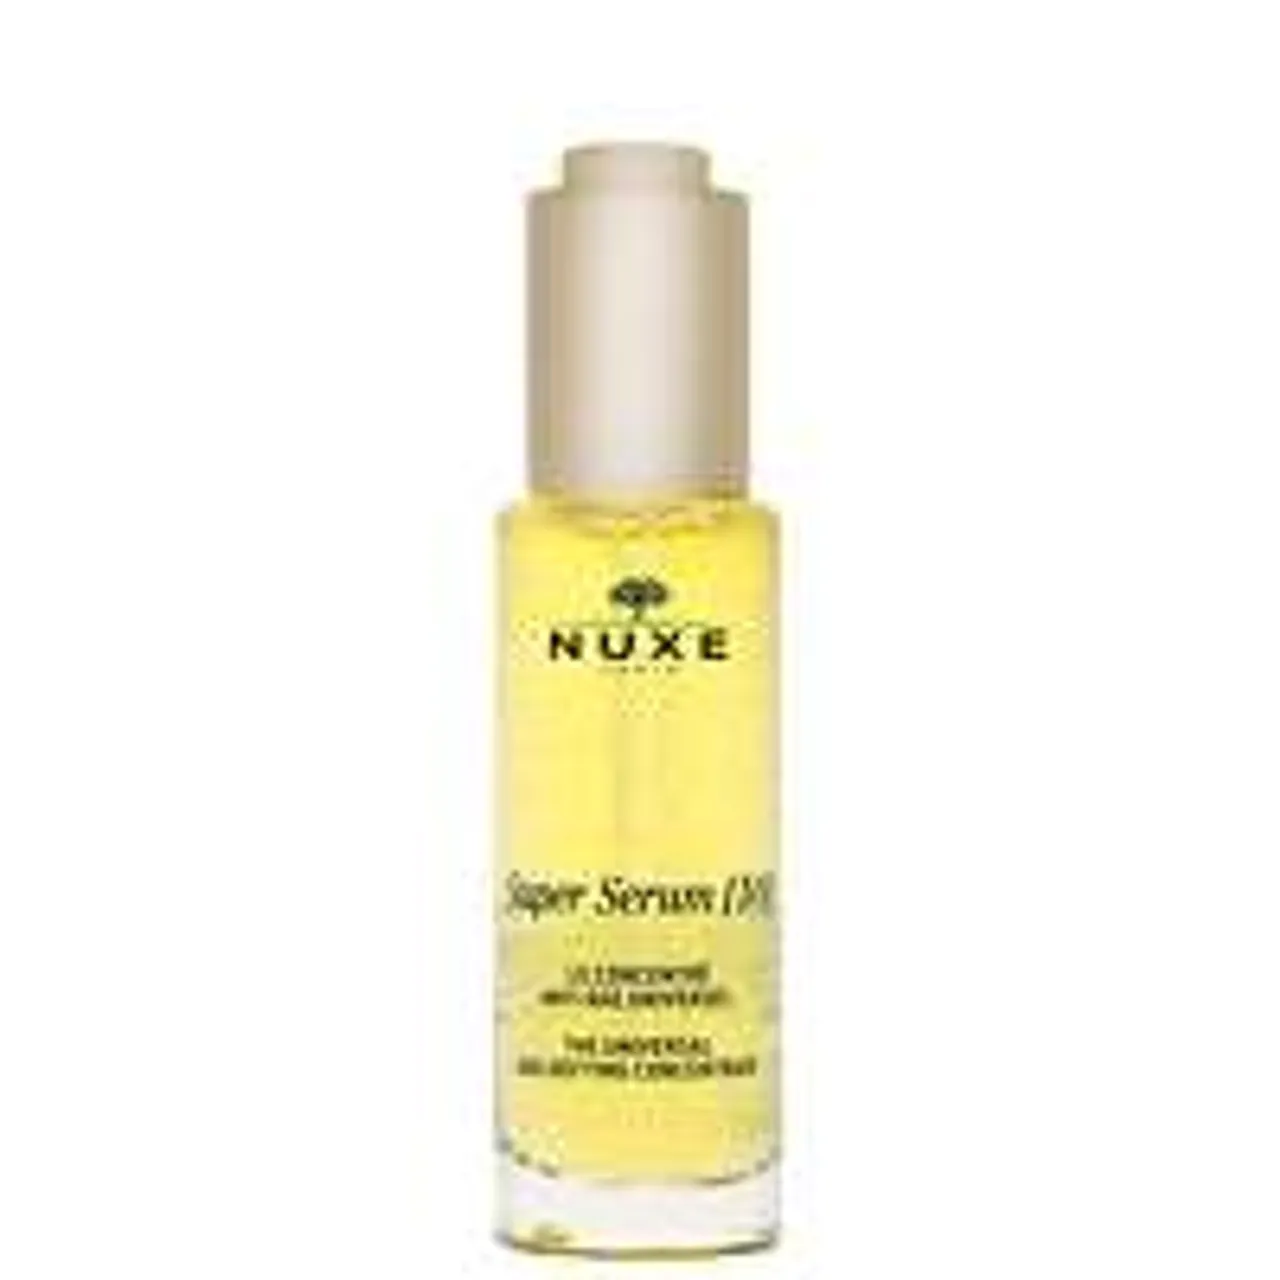 Nuxe Face Super Serum [10] The Universal Age-Defying Concentrate 30ml